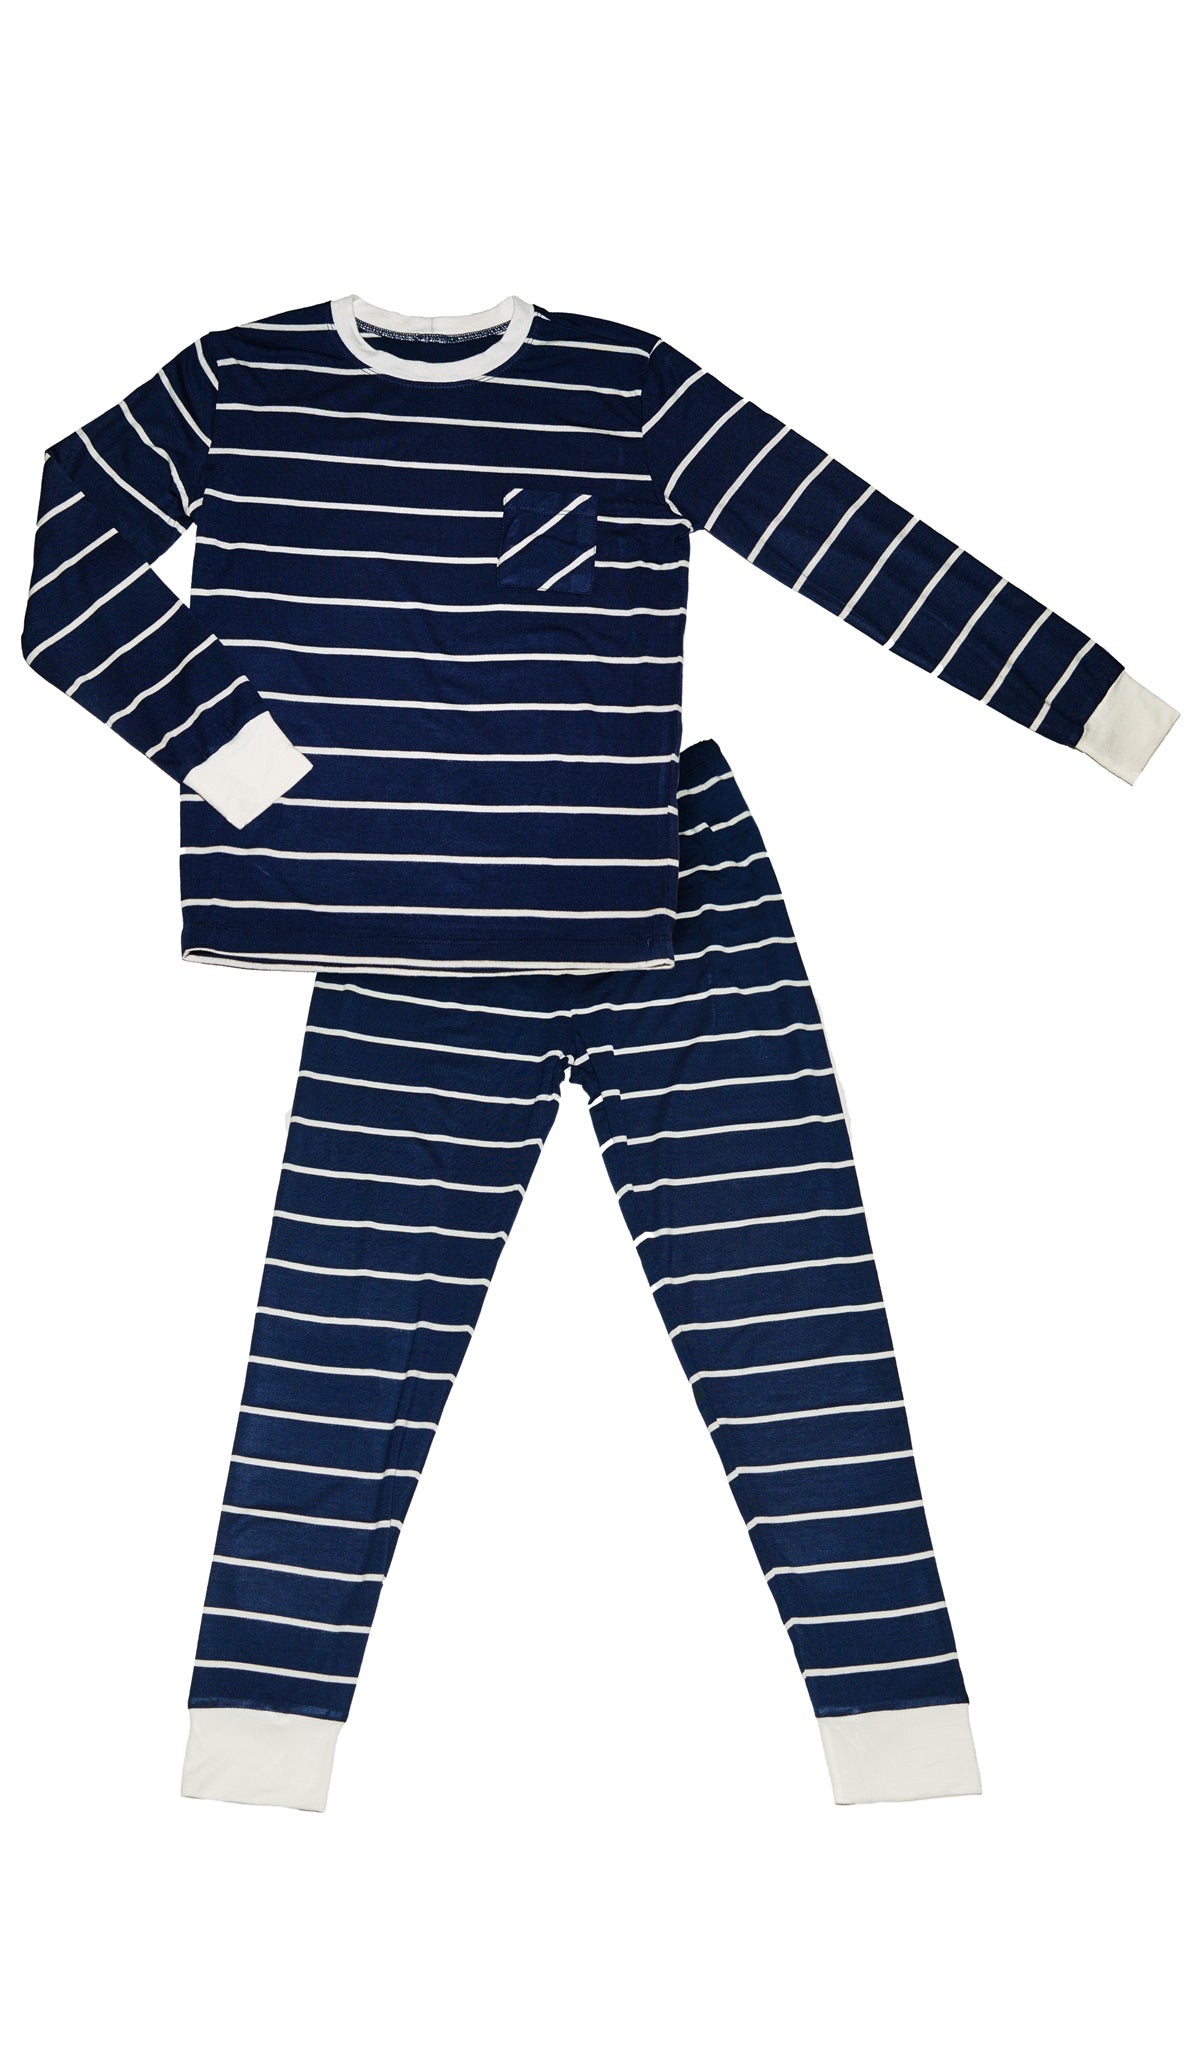 Navy Emerson Baby 2-Piece Pant PJ consisting of long sleeve top and long pant.